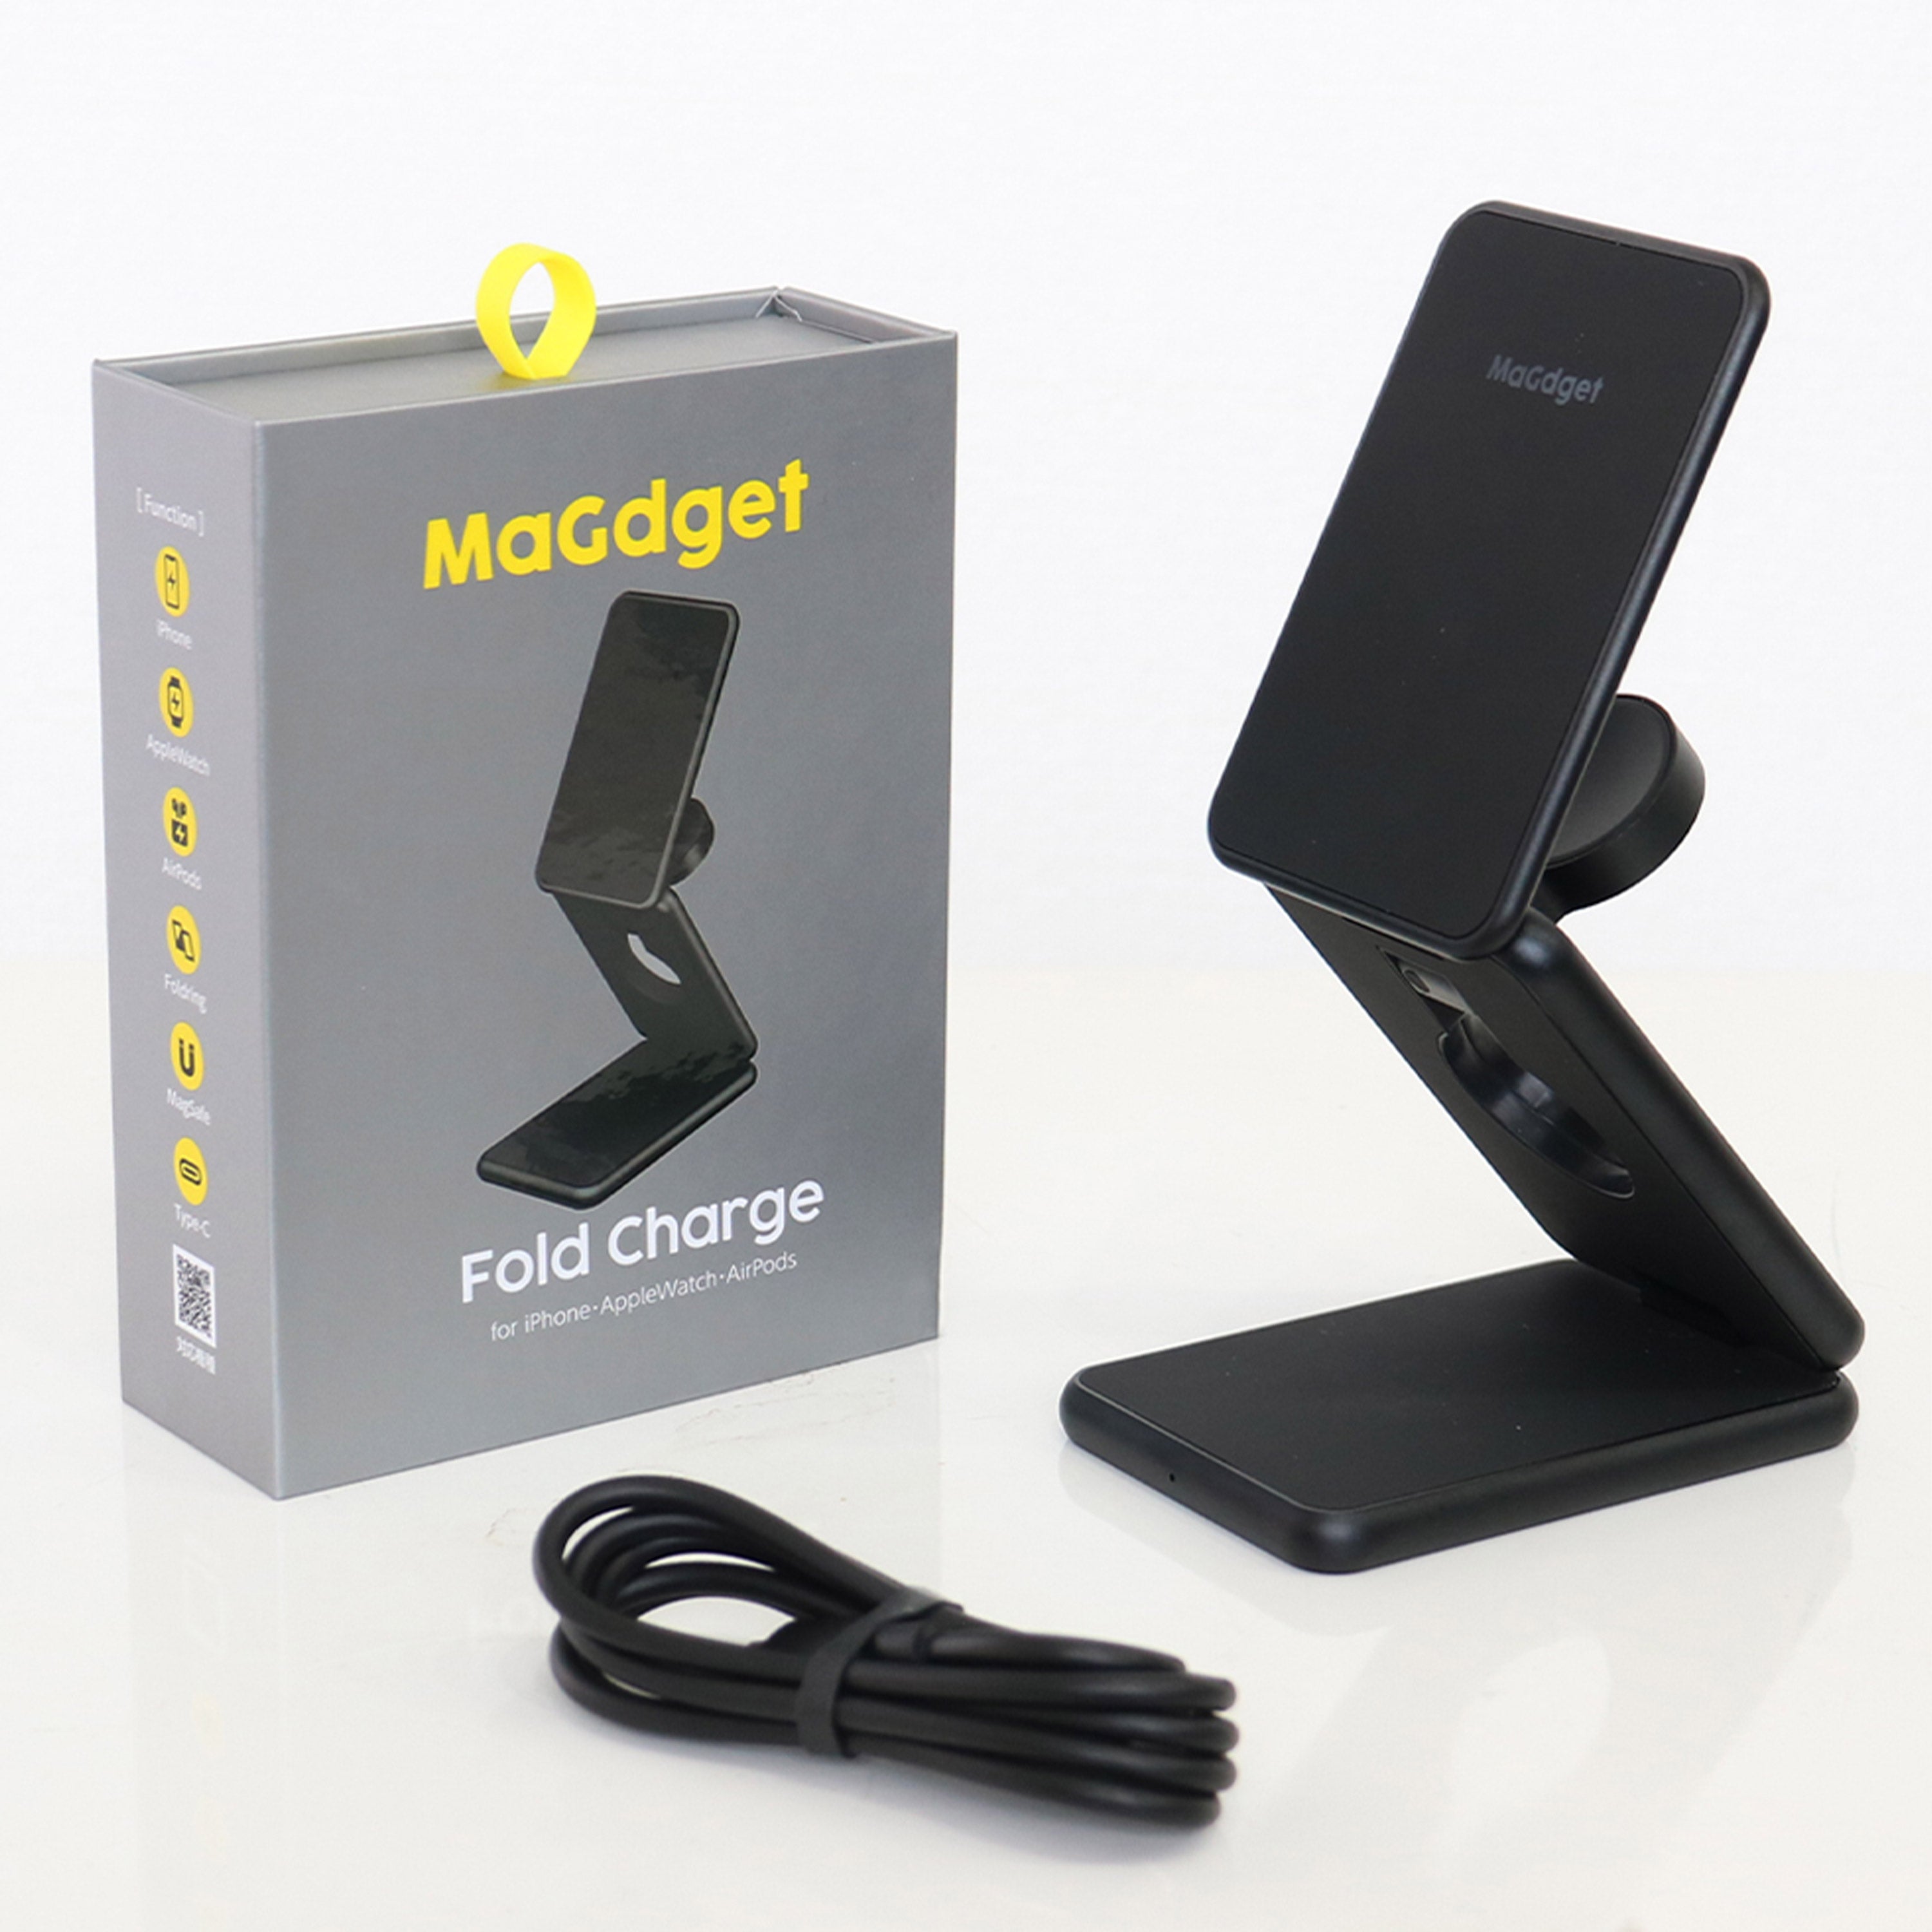 MaGdget Fold Charge